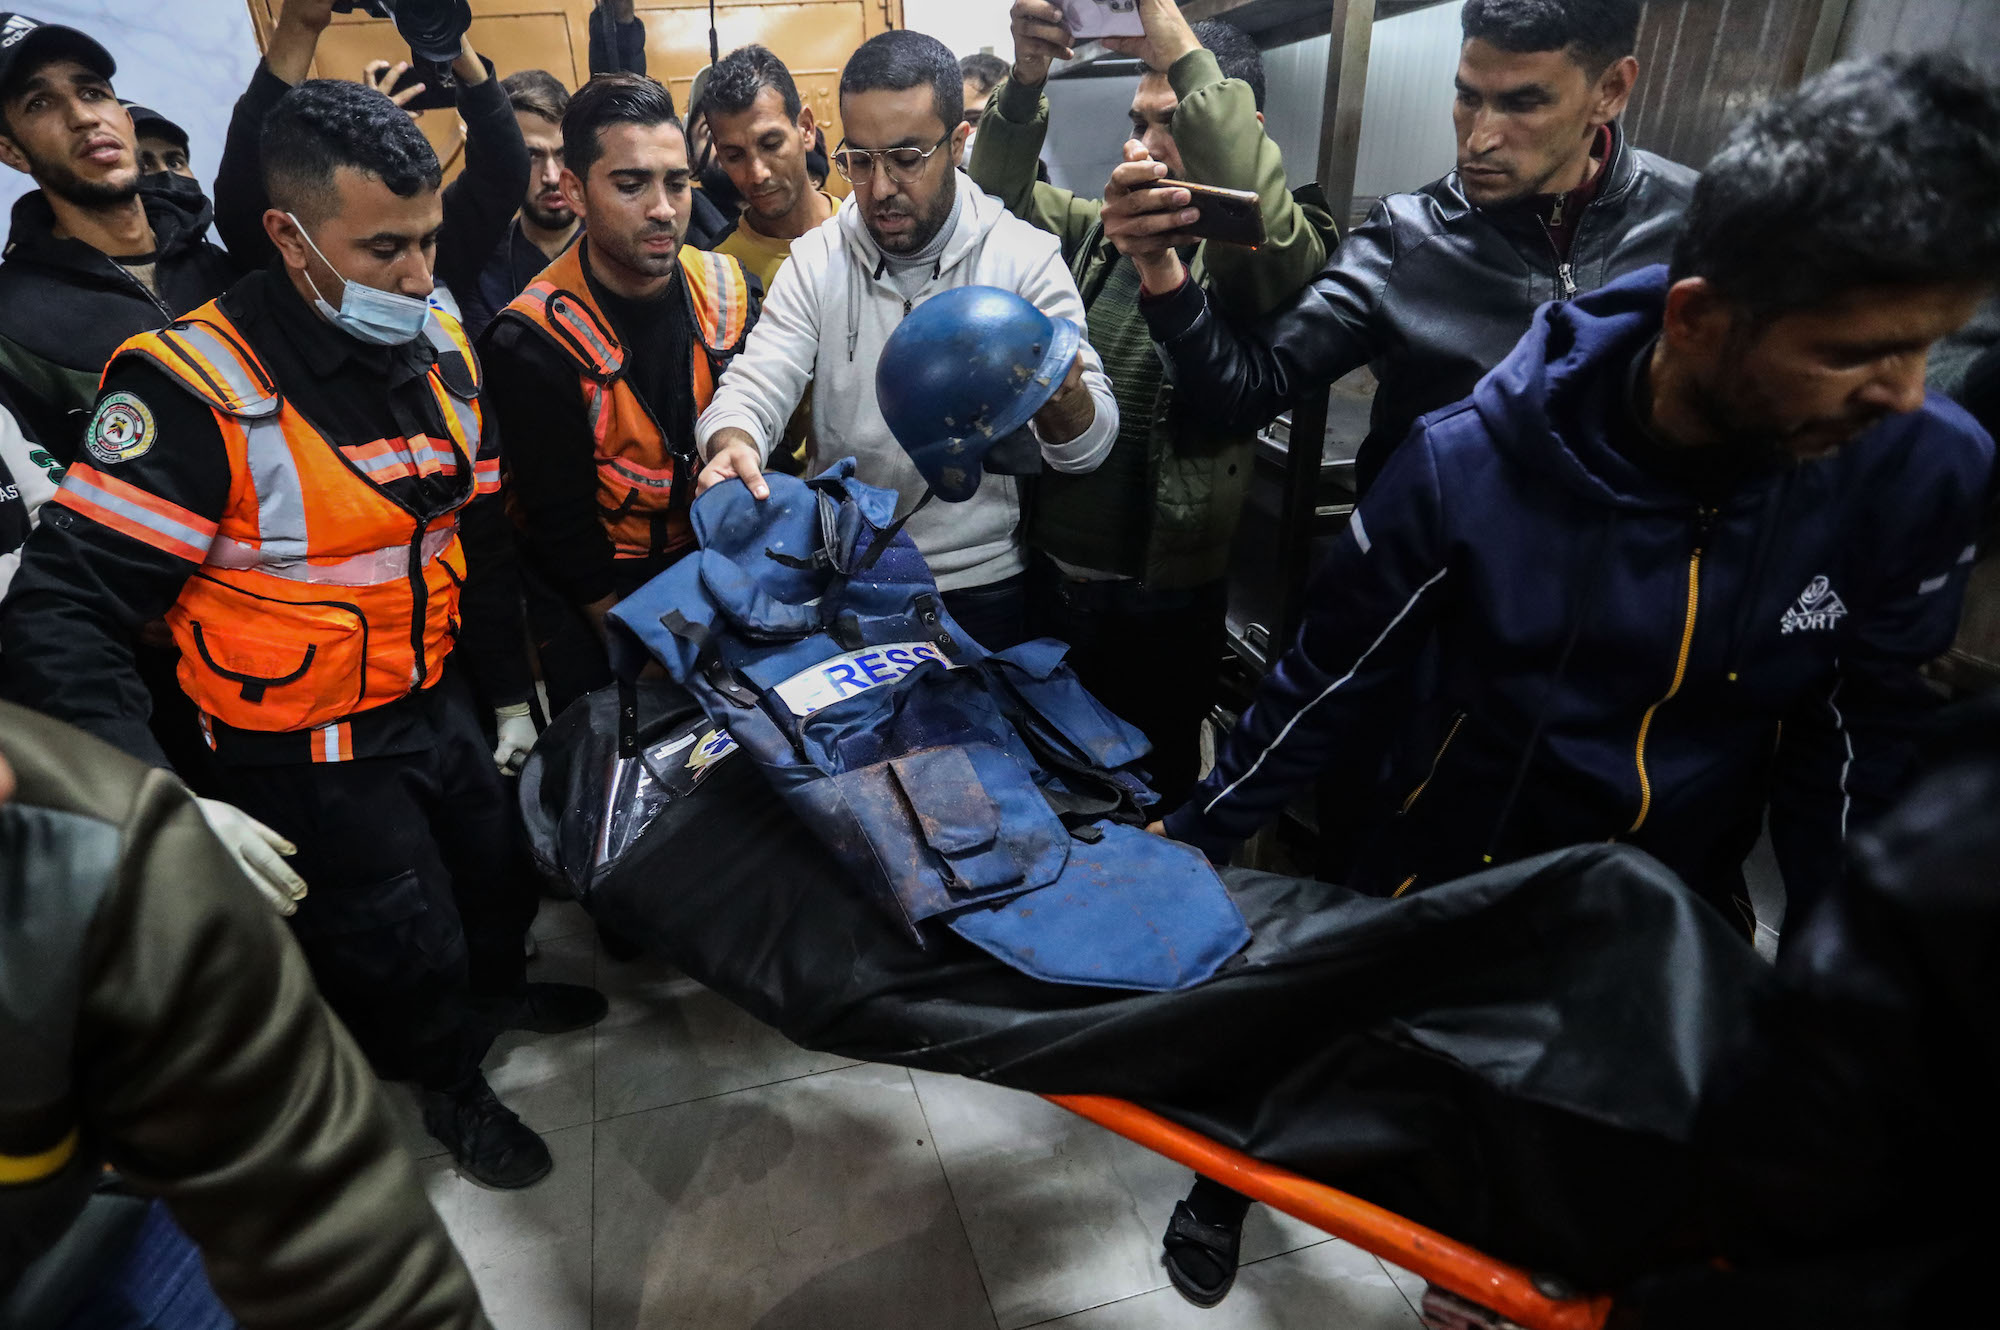 The stretcher carrying the body of Al Jazeera TV cameraman Samer Abu Daqqa, who was killed while working in an airstrike,  in Khan Younis, Gaza, on Friday.